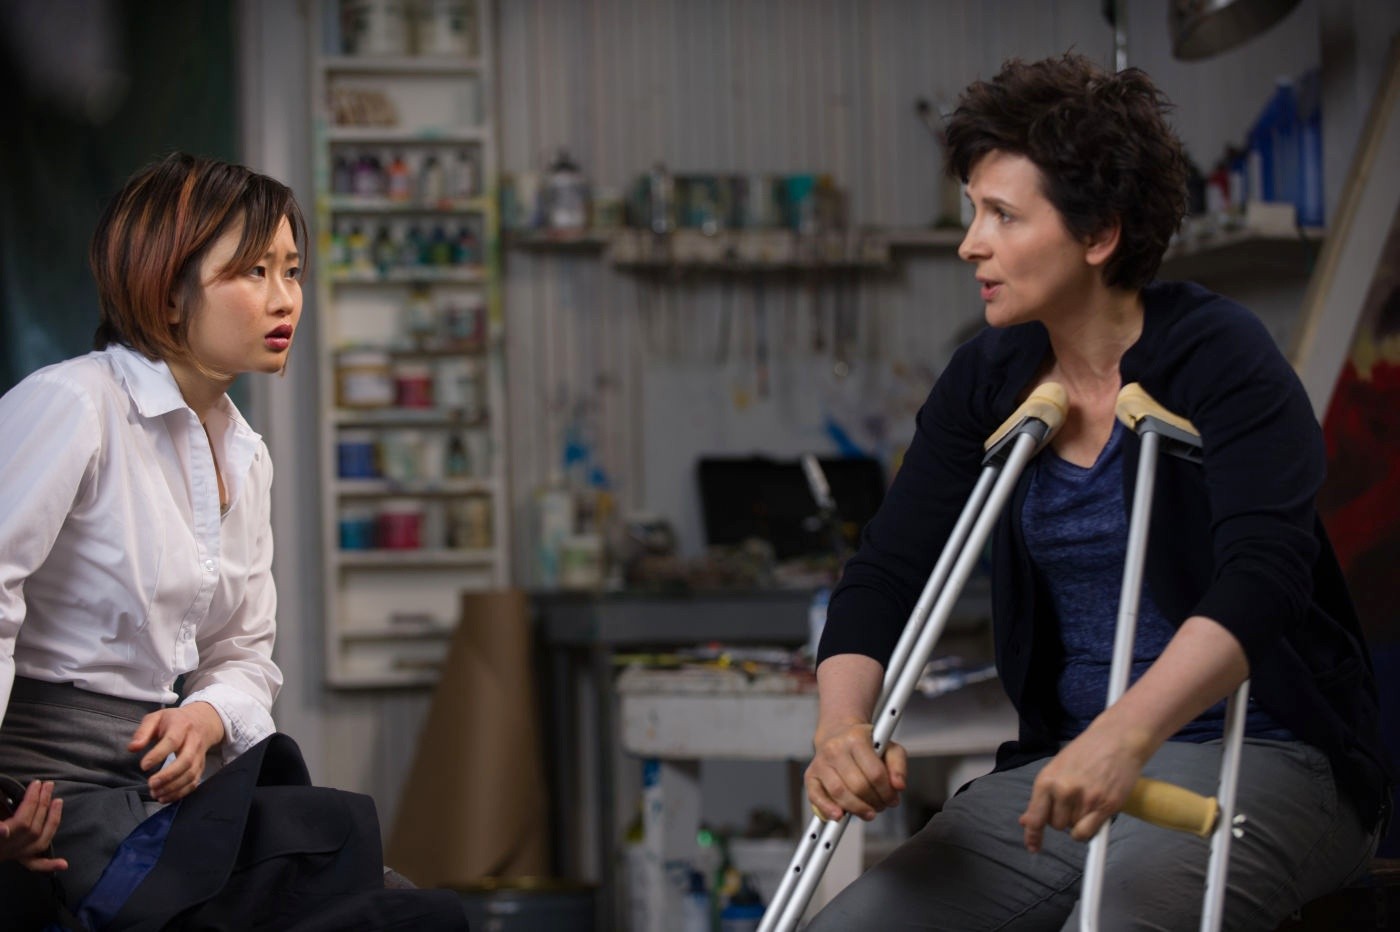 Valerie Tian stars as Emily and Juliette Binoche stars as Dina Delsanto in Roadside Attractions' Words and Pictures (2014)